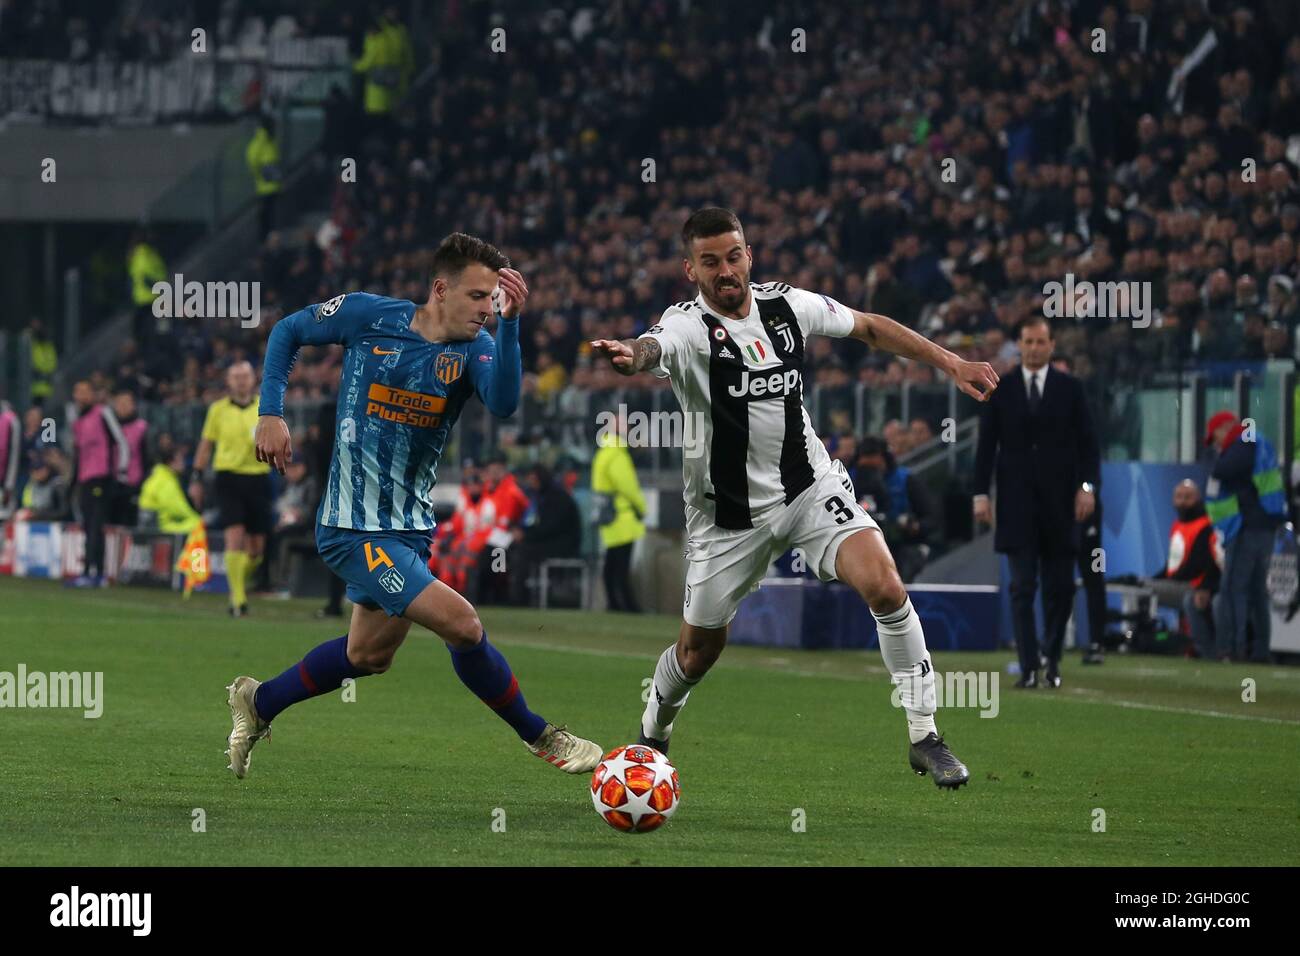 Santiago Arias of Atletico Madrid and Leonardo Spinazzola of Juventus during the UEFA Champions League Round of 16 match at the Allianz Stadium, Turin, Italy. Picture date 12th March 2019. Picture credit should read: Jonathan Moscrop/Sportimage via PA Images Stock Photo